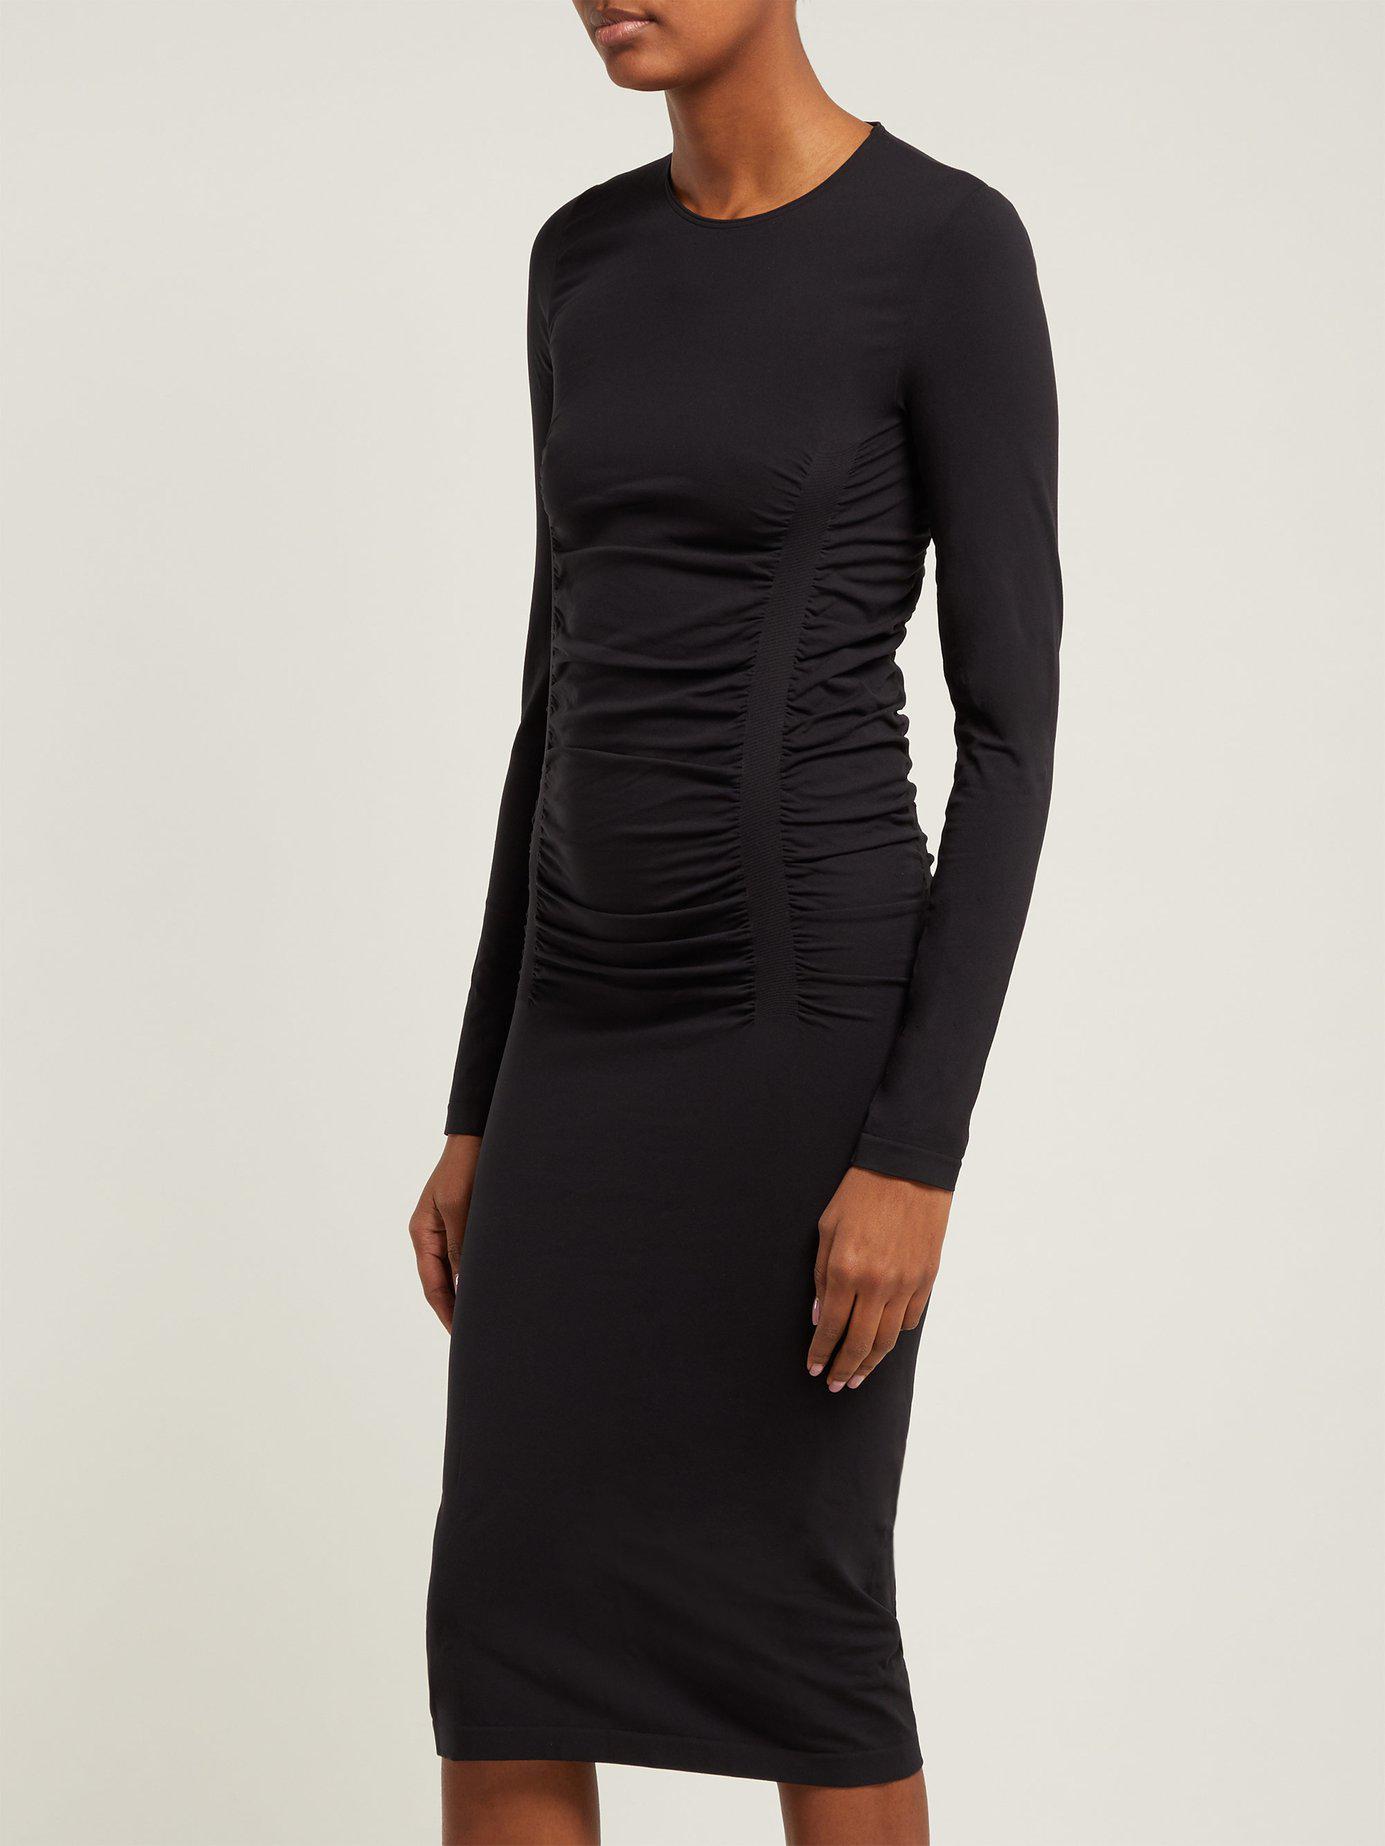 Wolford Fatal Drape Ruched Jersey Dress in Black - Lyst